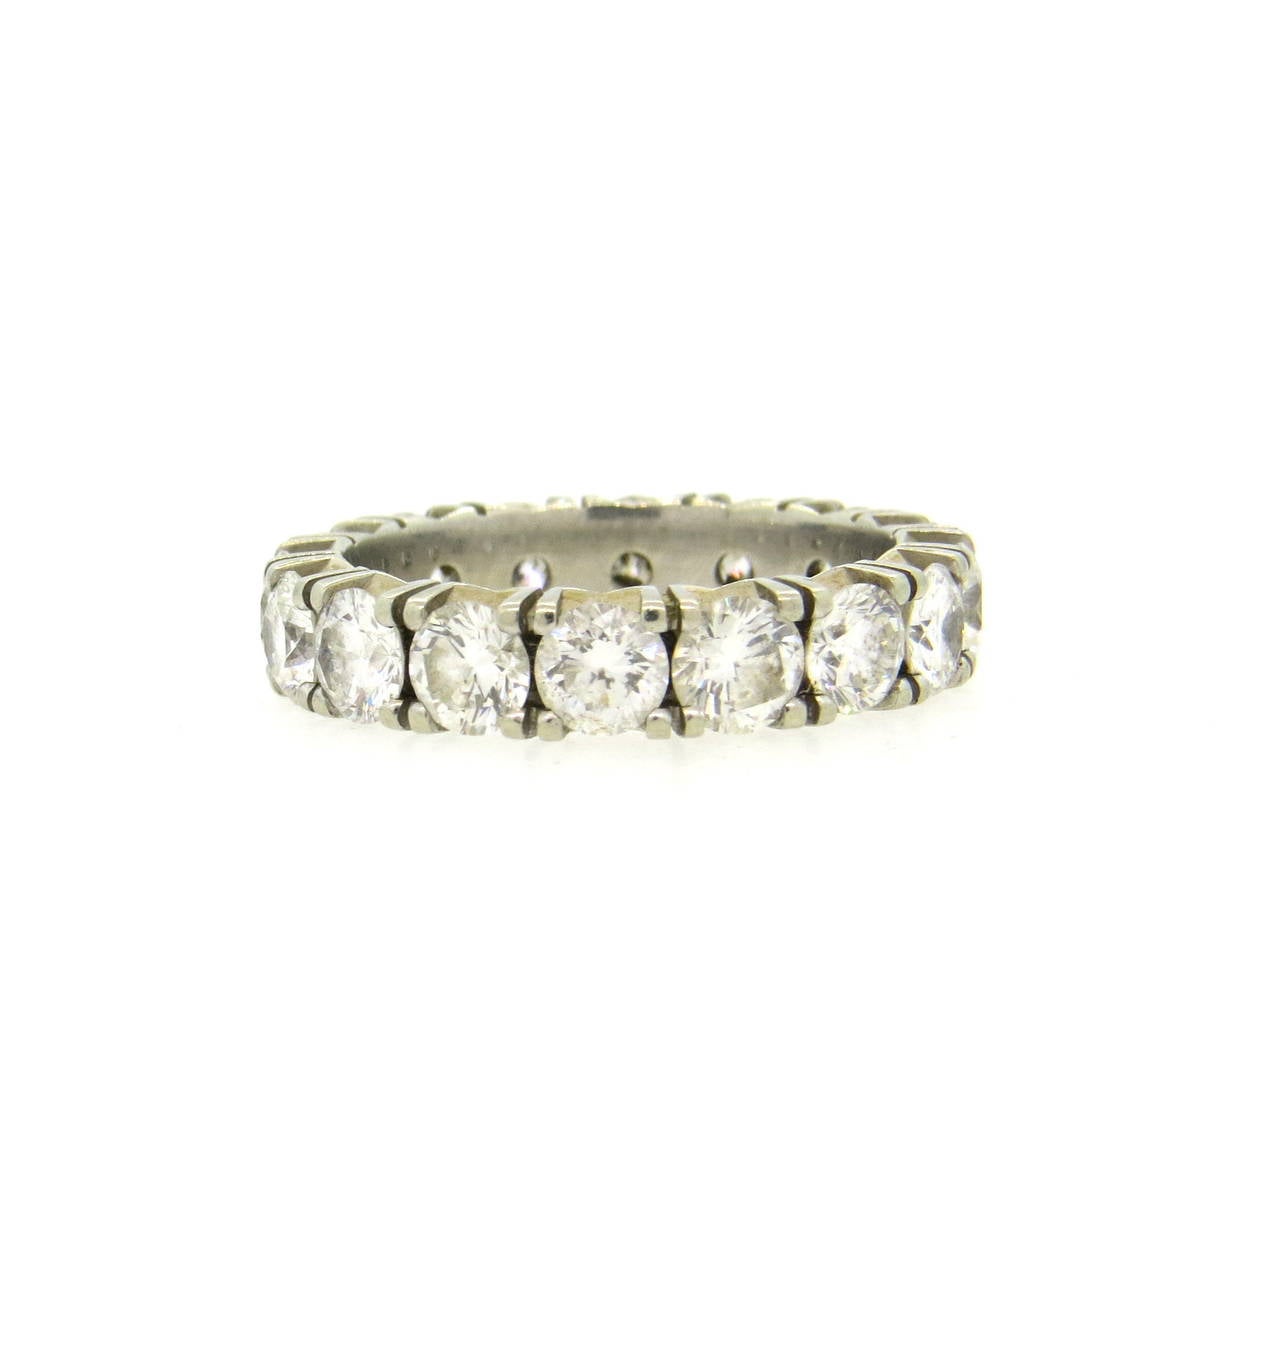 An 18k white gold eternity wedding band ring set with 16 H/VS-SI diamonds approximately 4ctw.  The ring is a size 7.25 and 4.2mm in width.  The weight of the band is 4.9 grams.